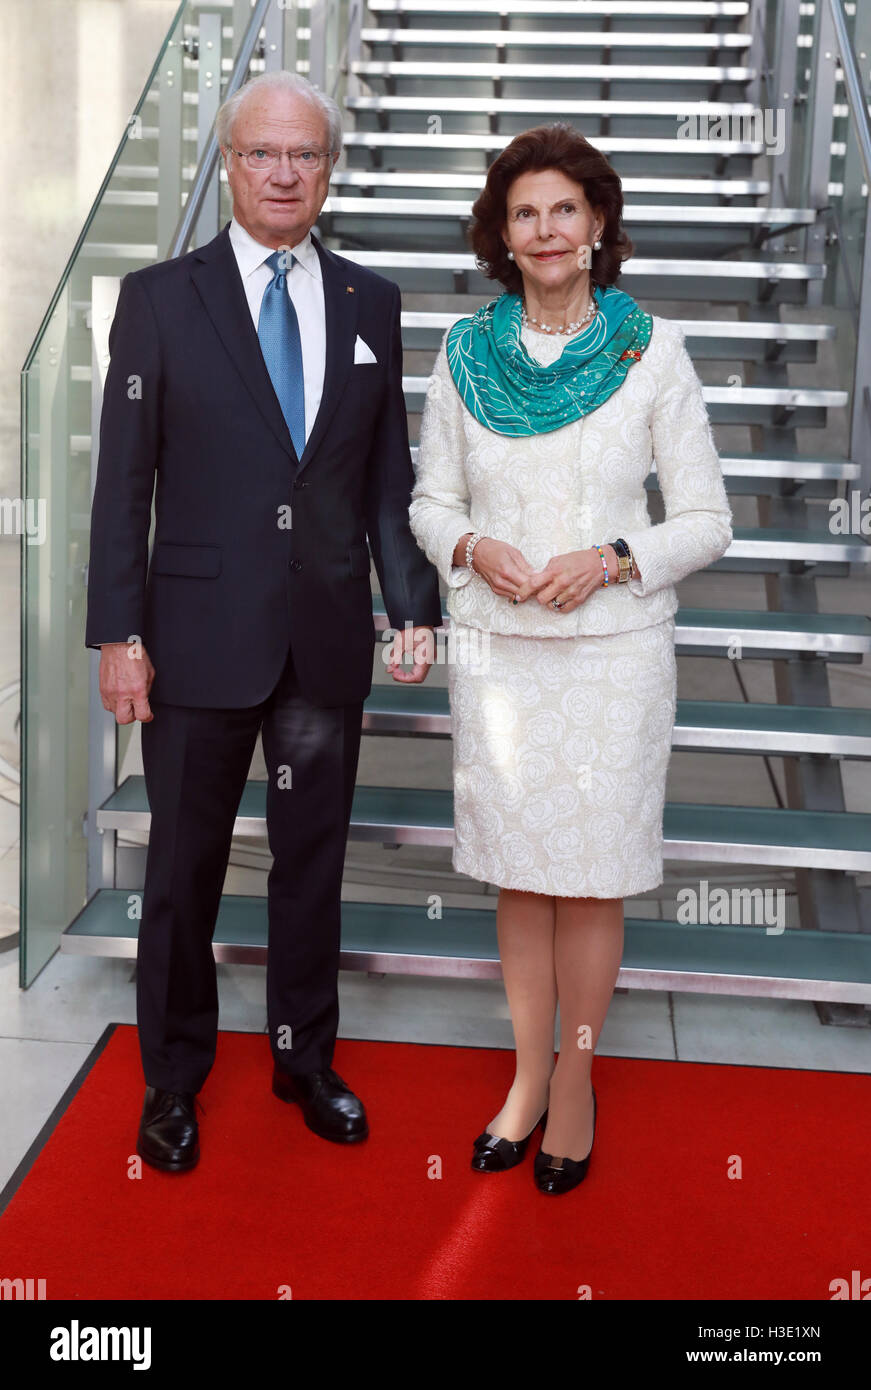 Berlin, Germany. 07th Oct, 2016. Queen Silvia of Sweden and King Carl XVI Gustaf of Sweden visit the 'Felleshus' in the nordic embassies in Berlin, 7 October 2016. The Swedish royal couple are visiting Germany for four days. Photo: Jörg Carstensen/dpa/Alamy Live News Stock Photo